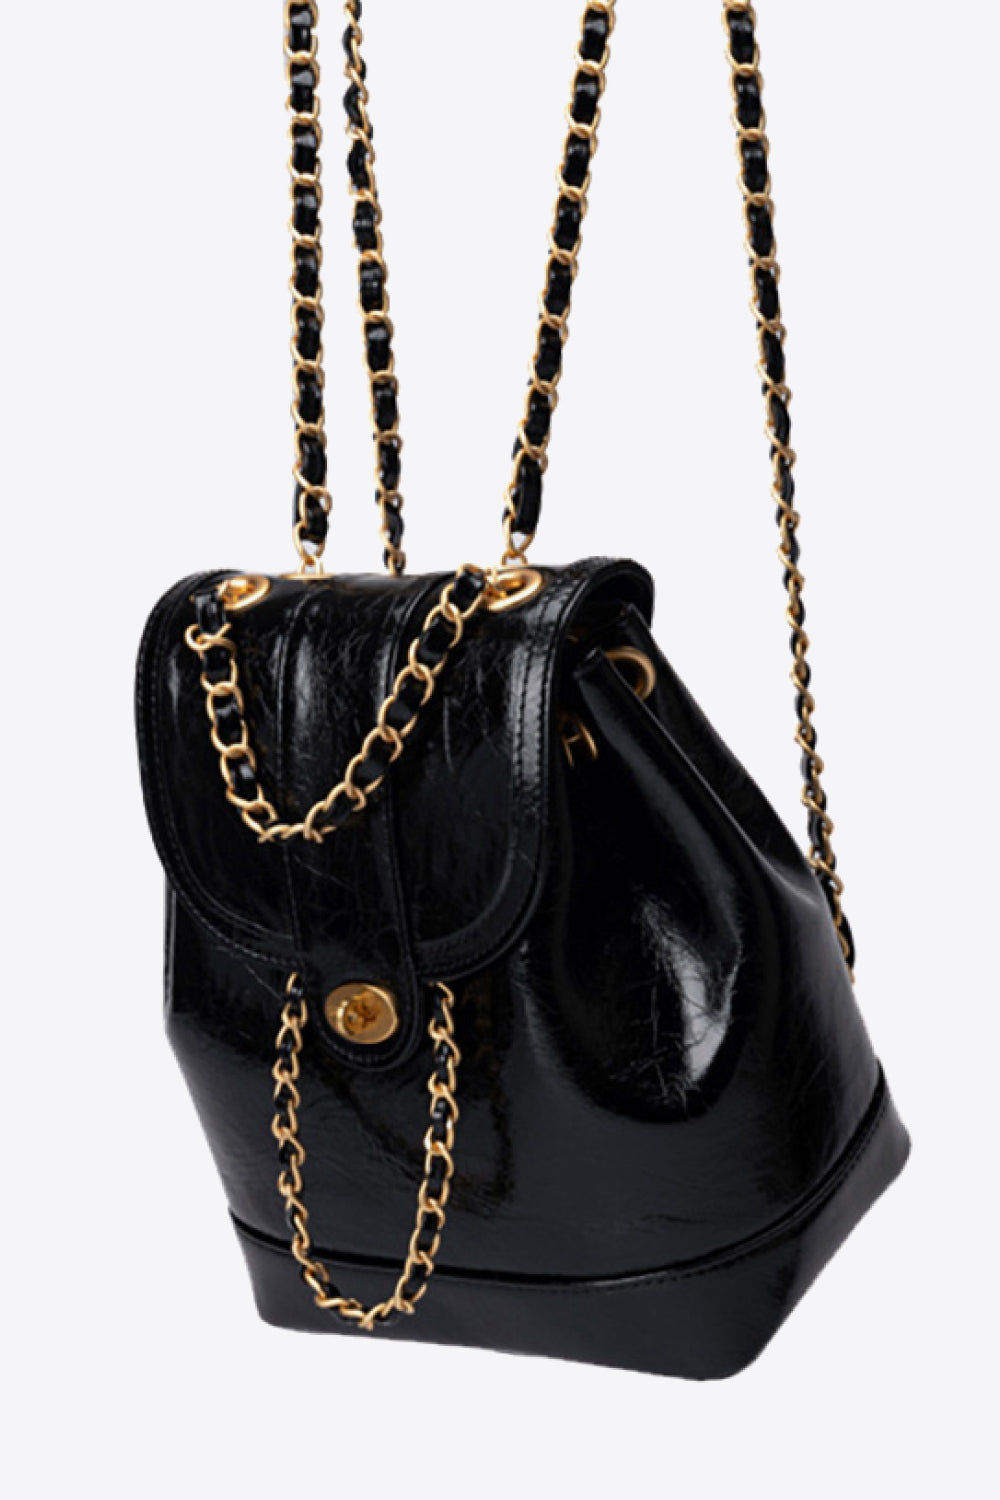 BLACK ONE SIZE Chain Link PU Leather Backpack - 3 colors - backpack at TFC&H Co.